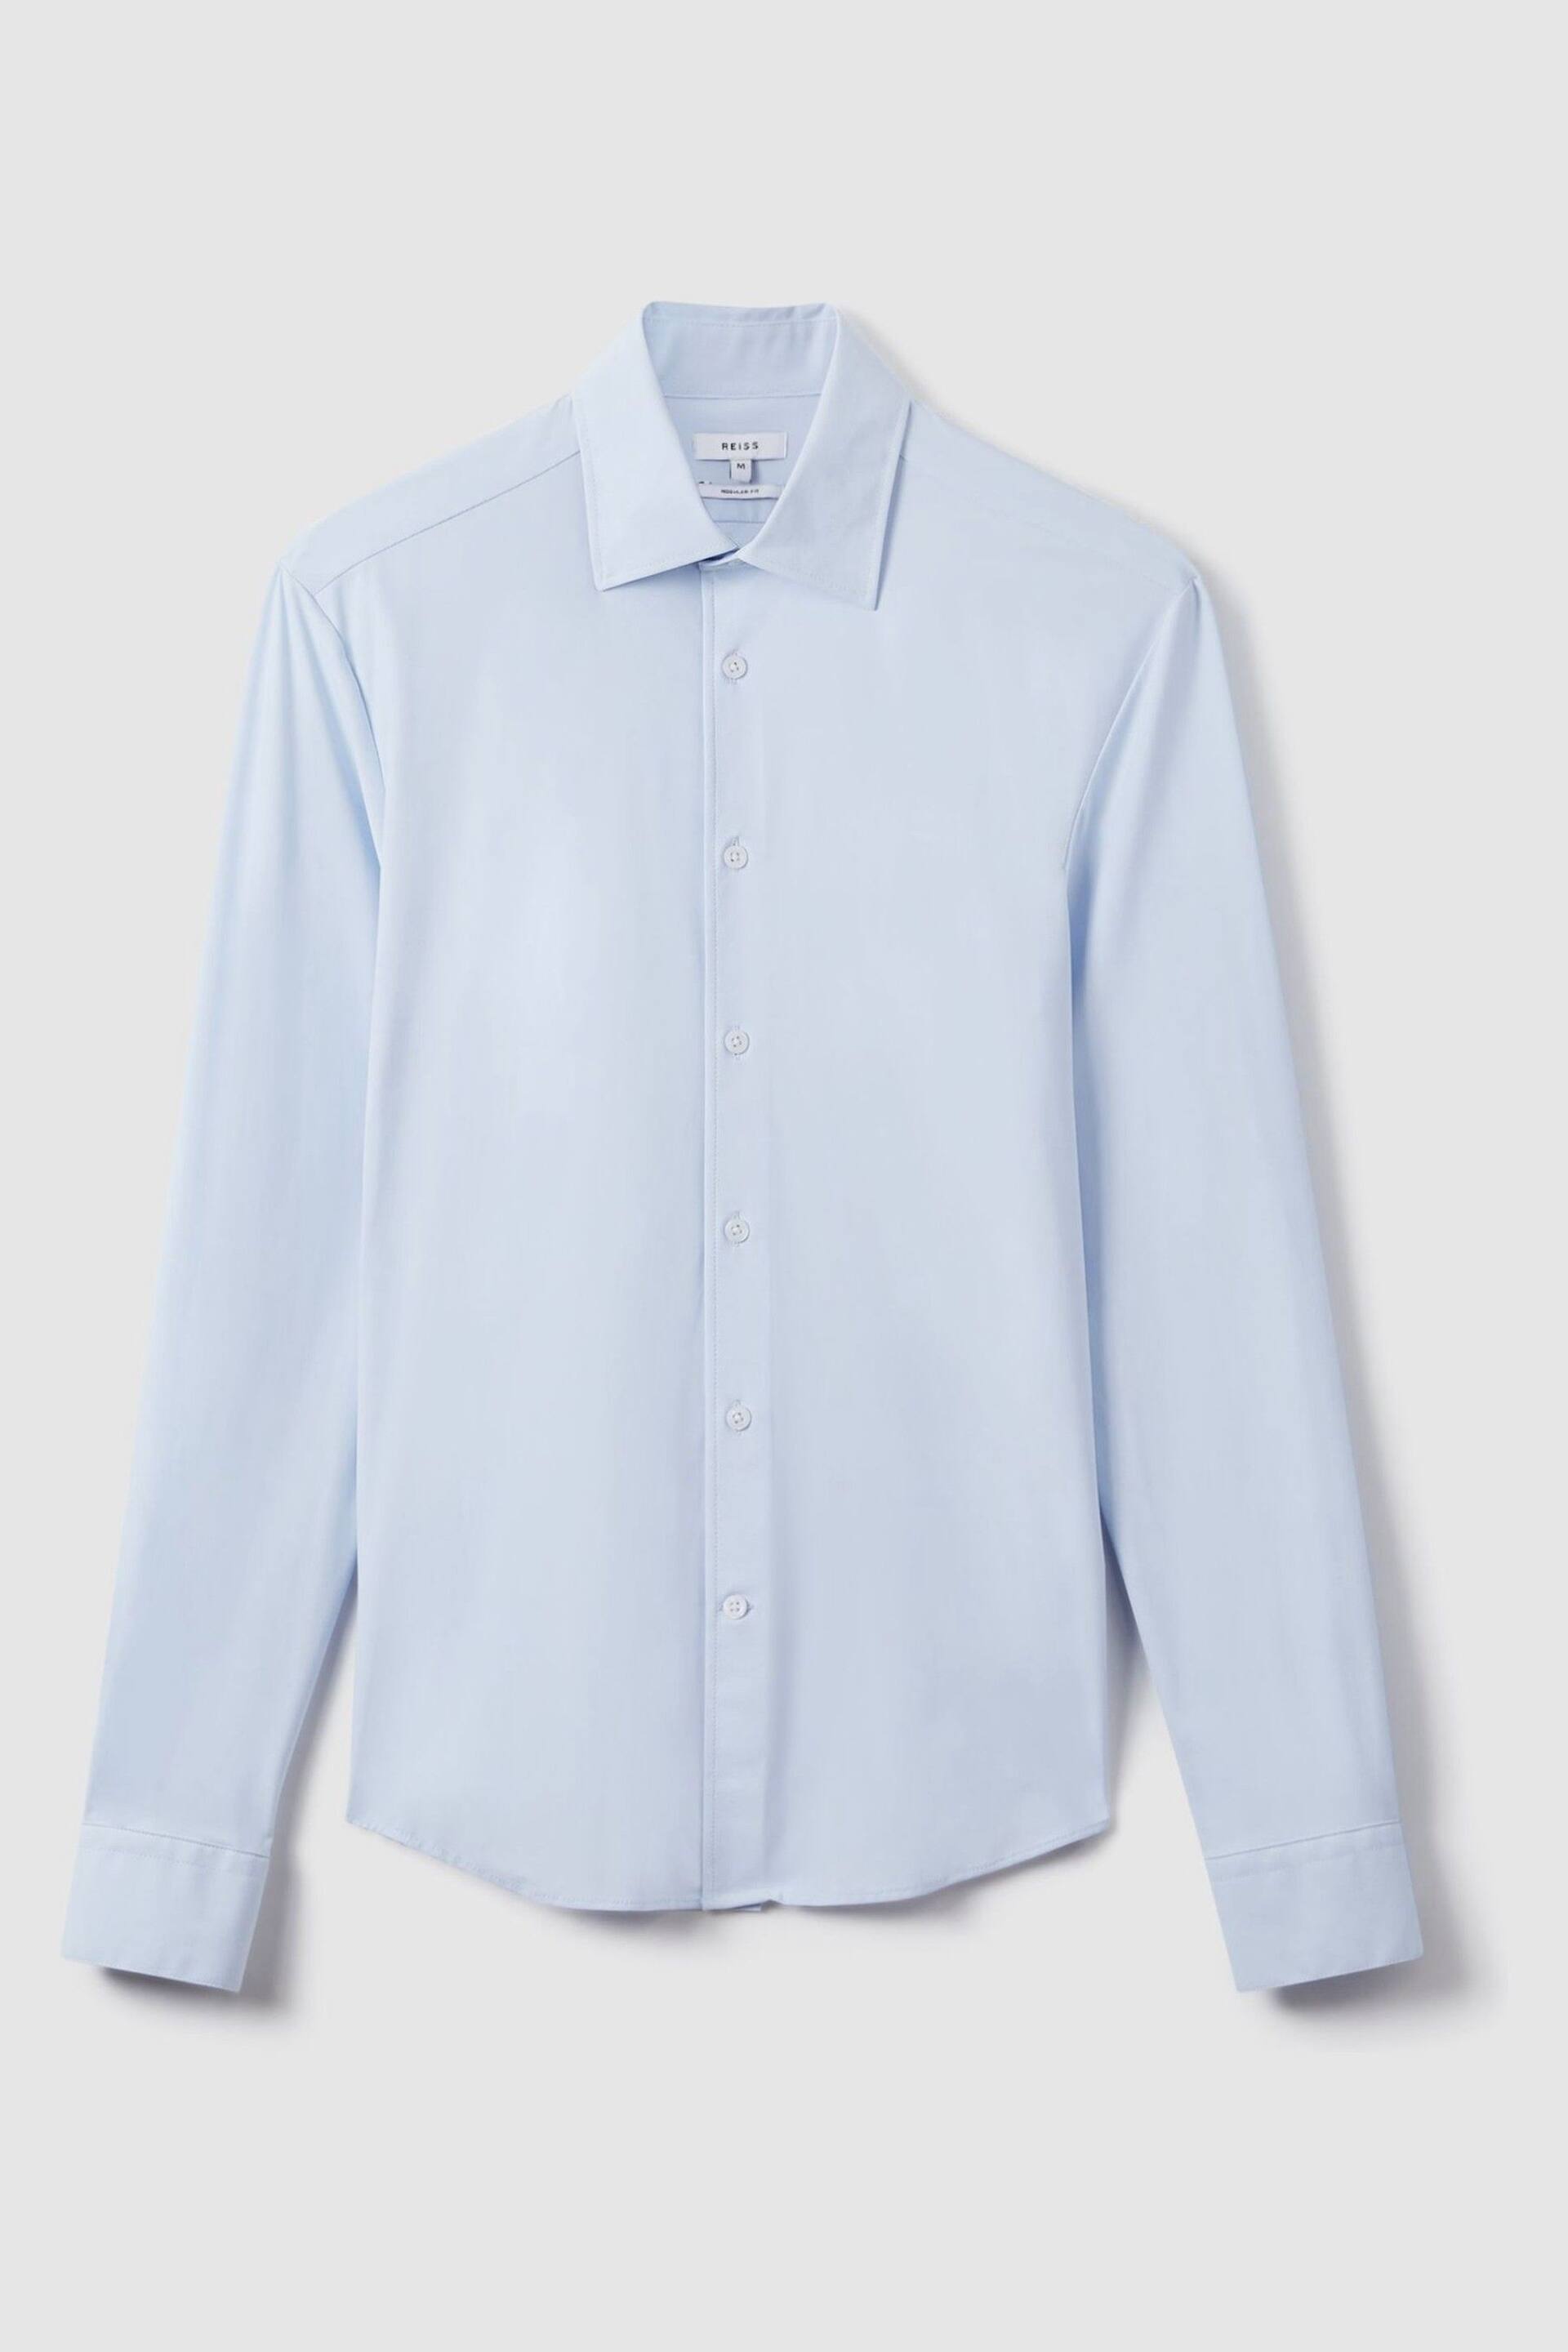 Reiss Soft Blue Voyager Slim Fit Button-Through Travel Shirt - Image 2 of 7